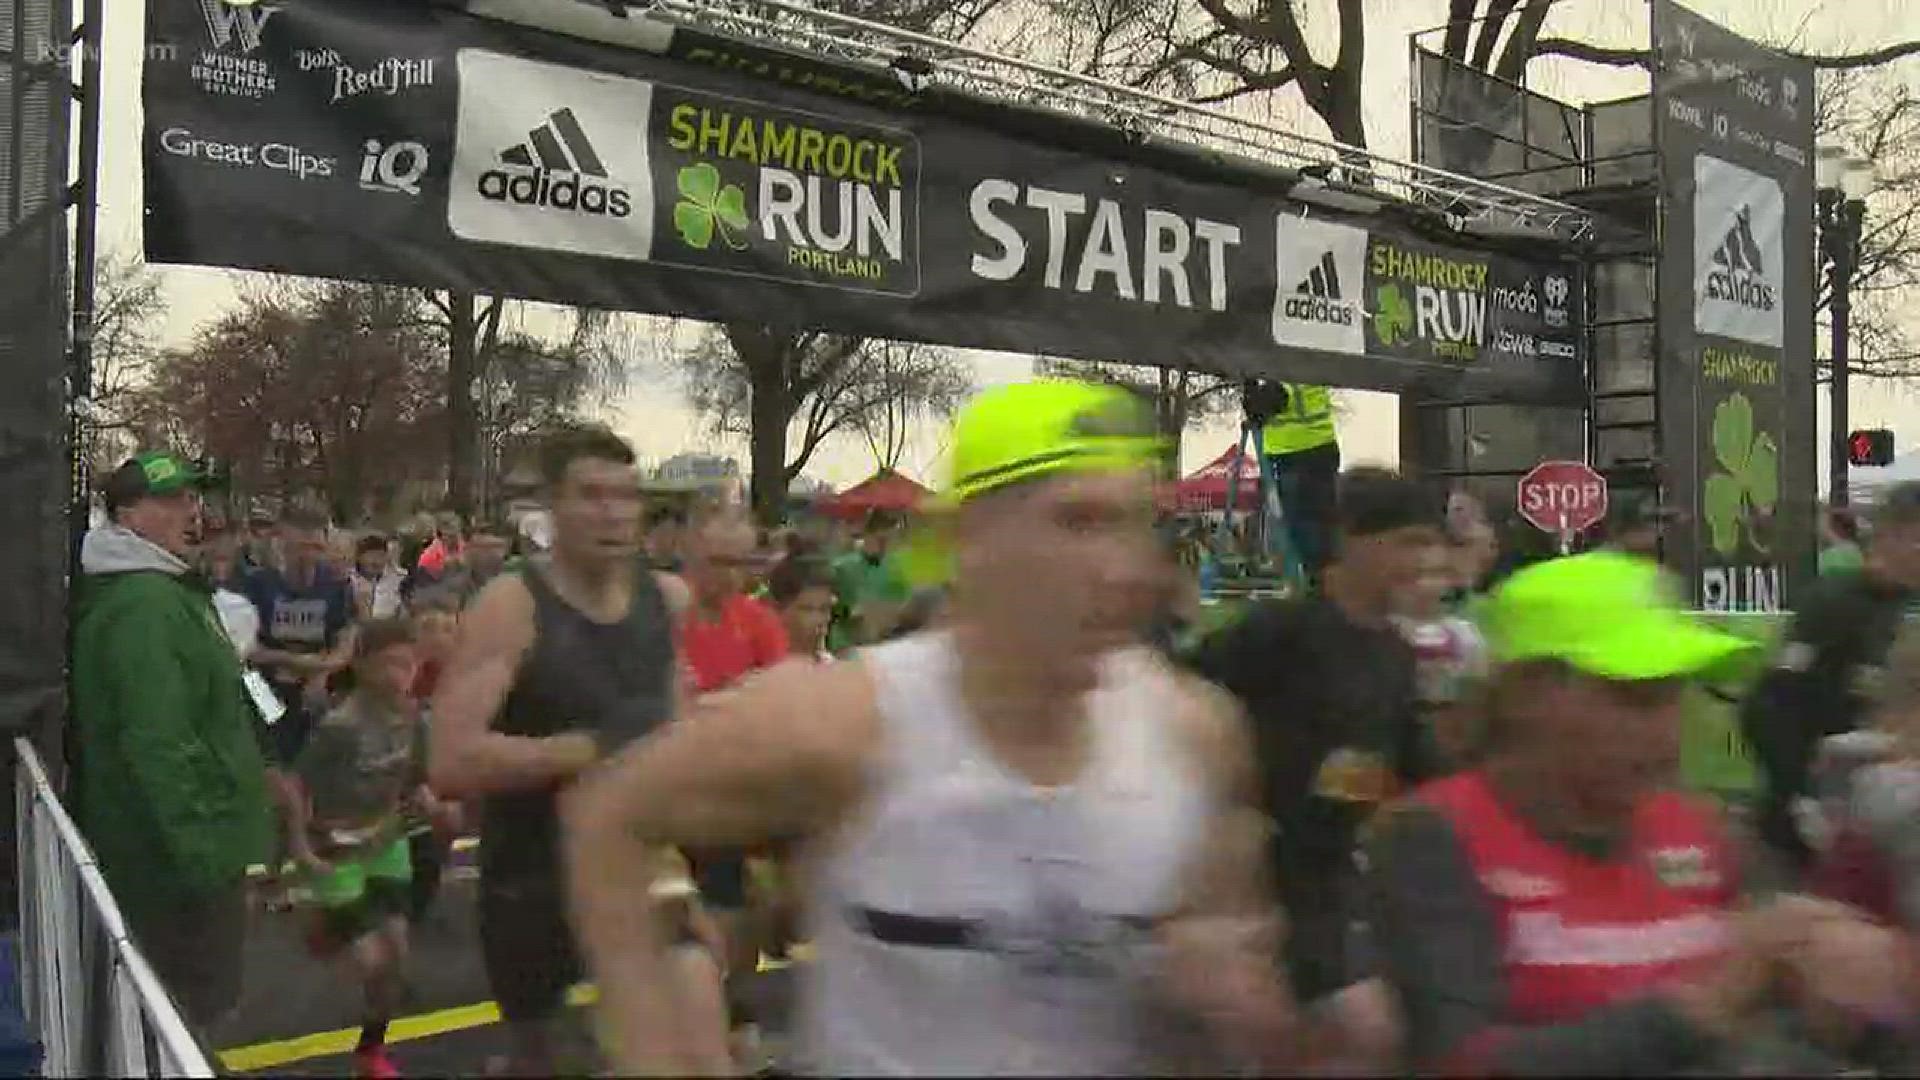 Southwest Portland was decked out in green today for the annual Shamrock Run!